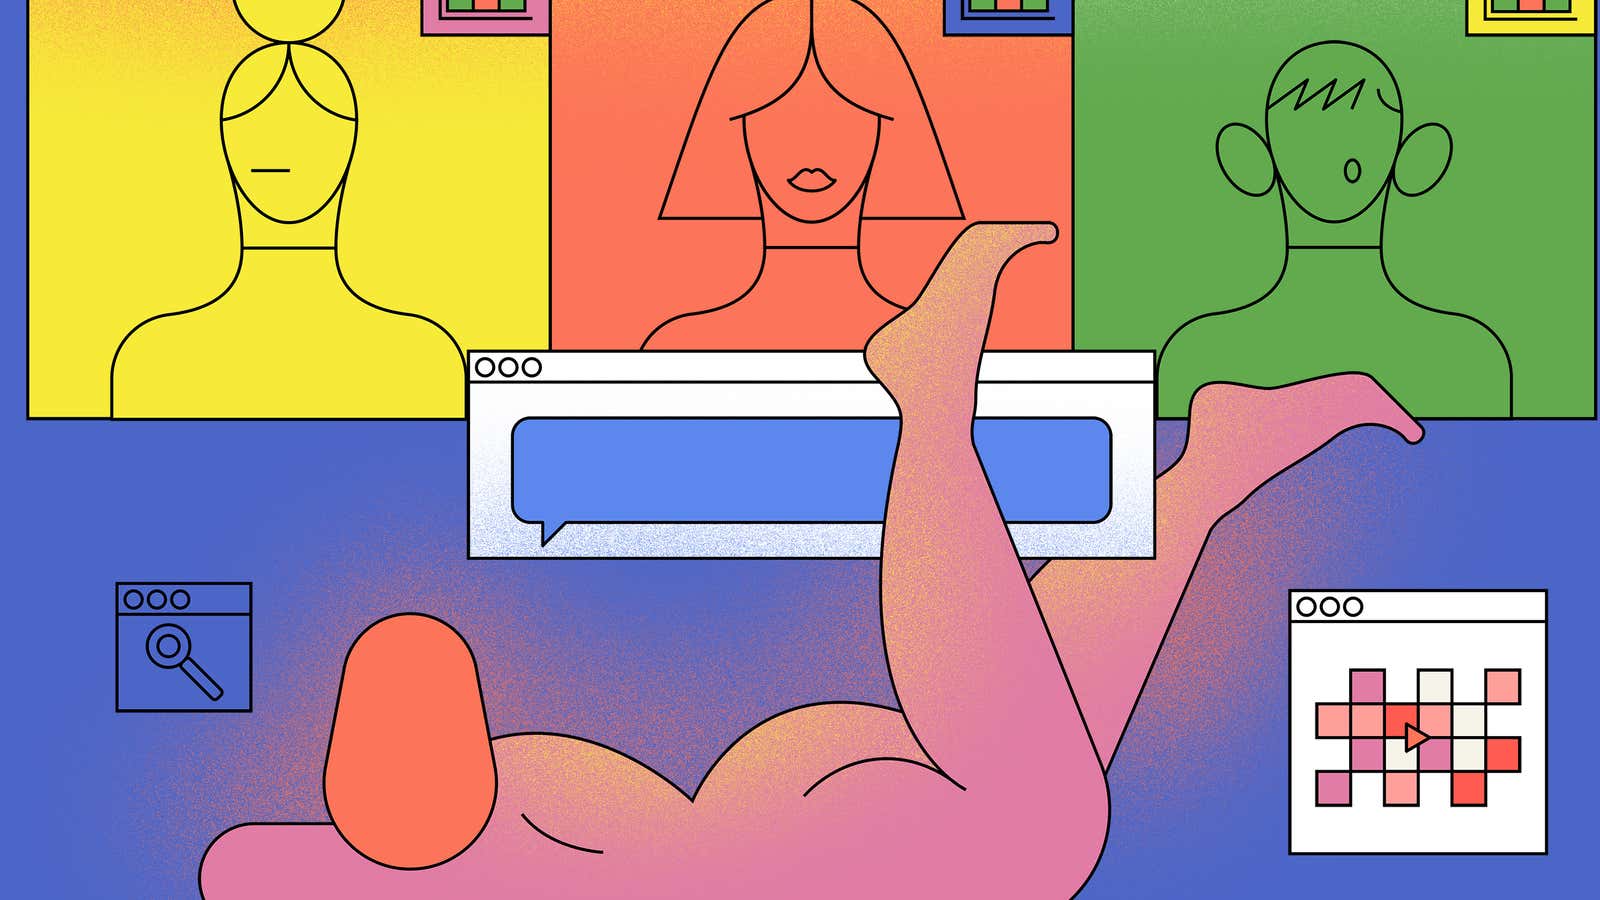 Porn sites collect more user data than Netflix or Hulu. This is what they do with it.